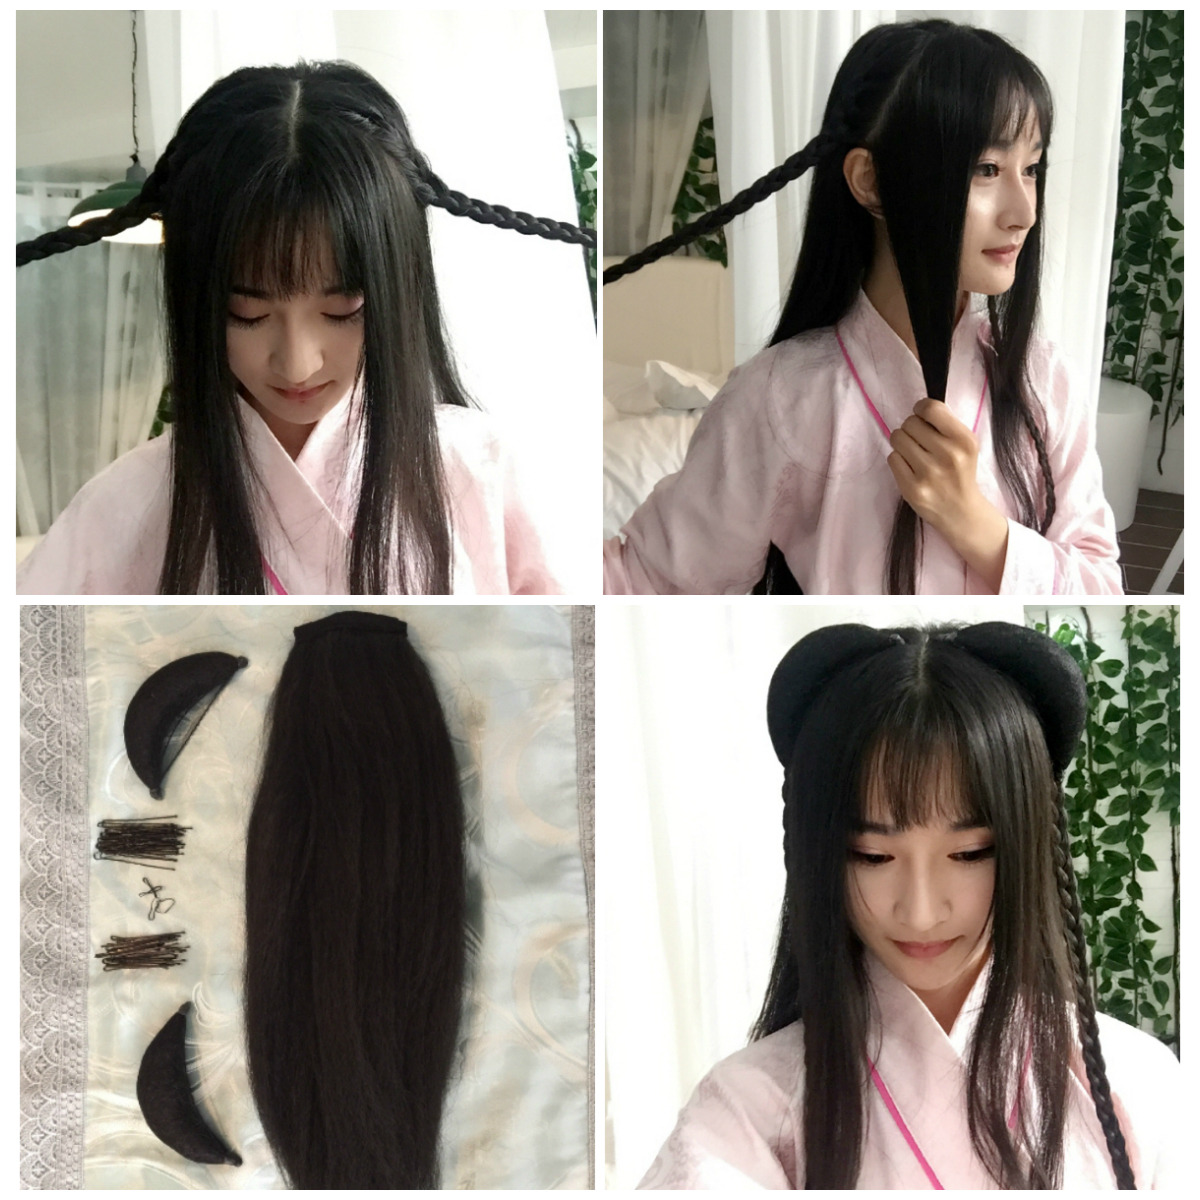 What were some popular female hairstyles in Ancient China? - Quora